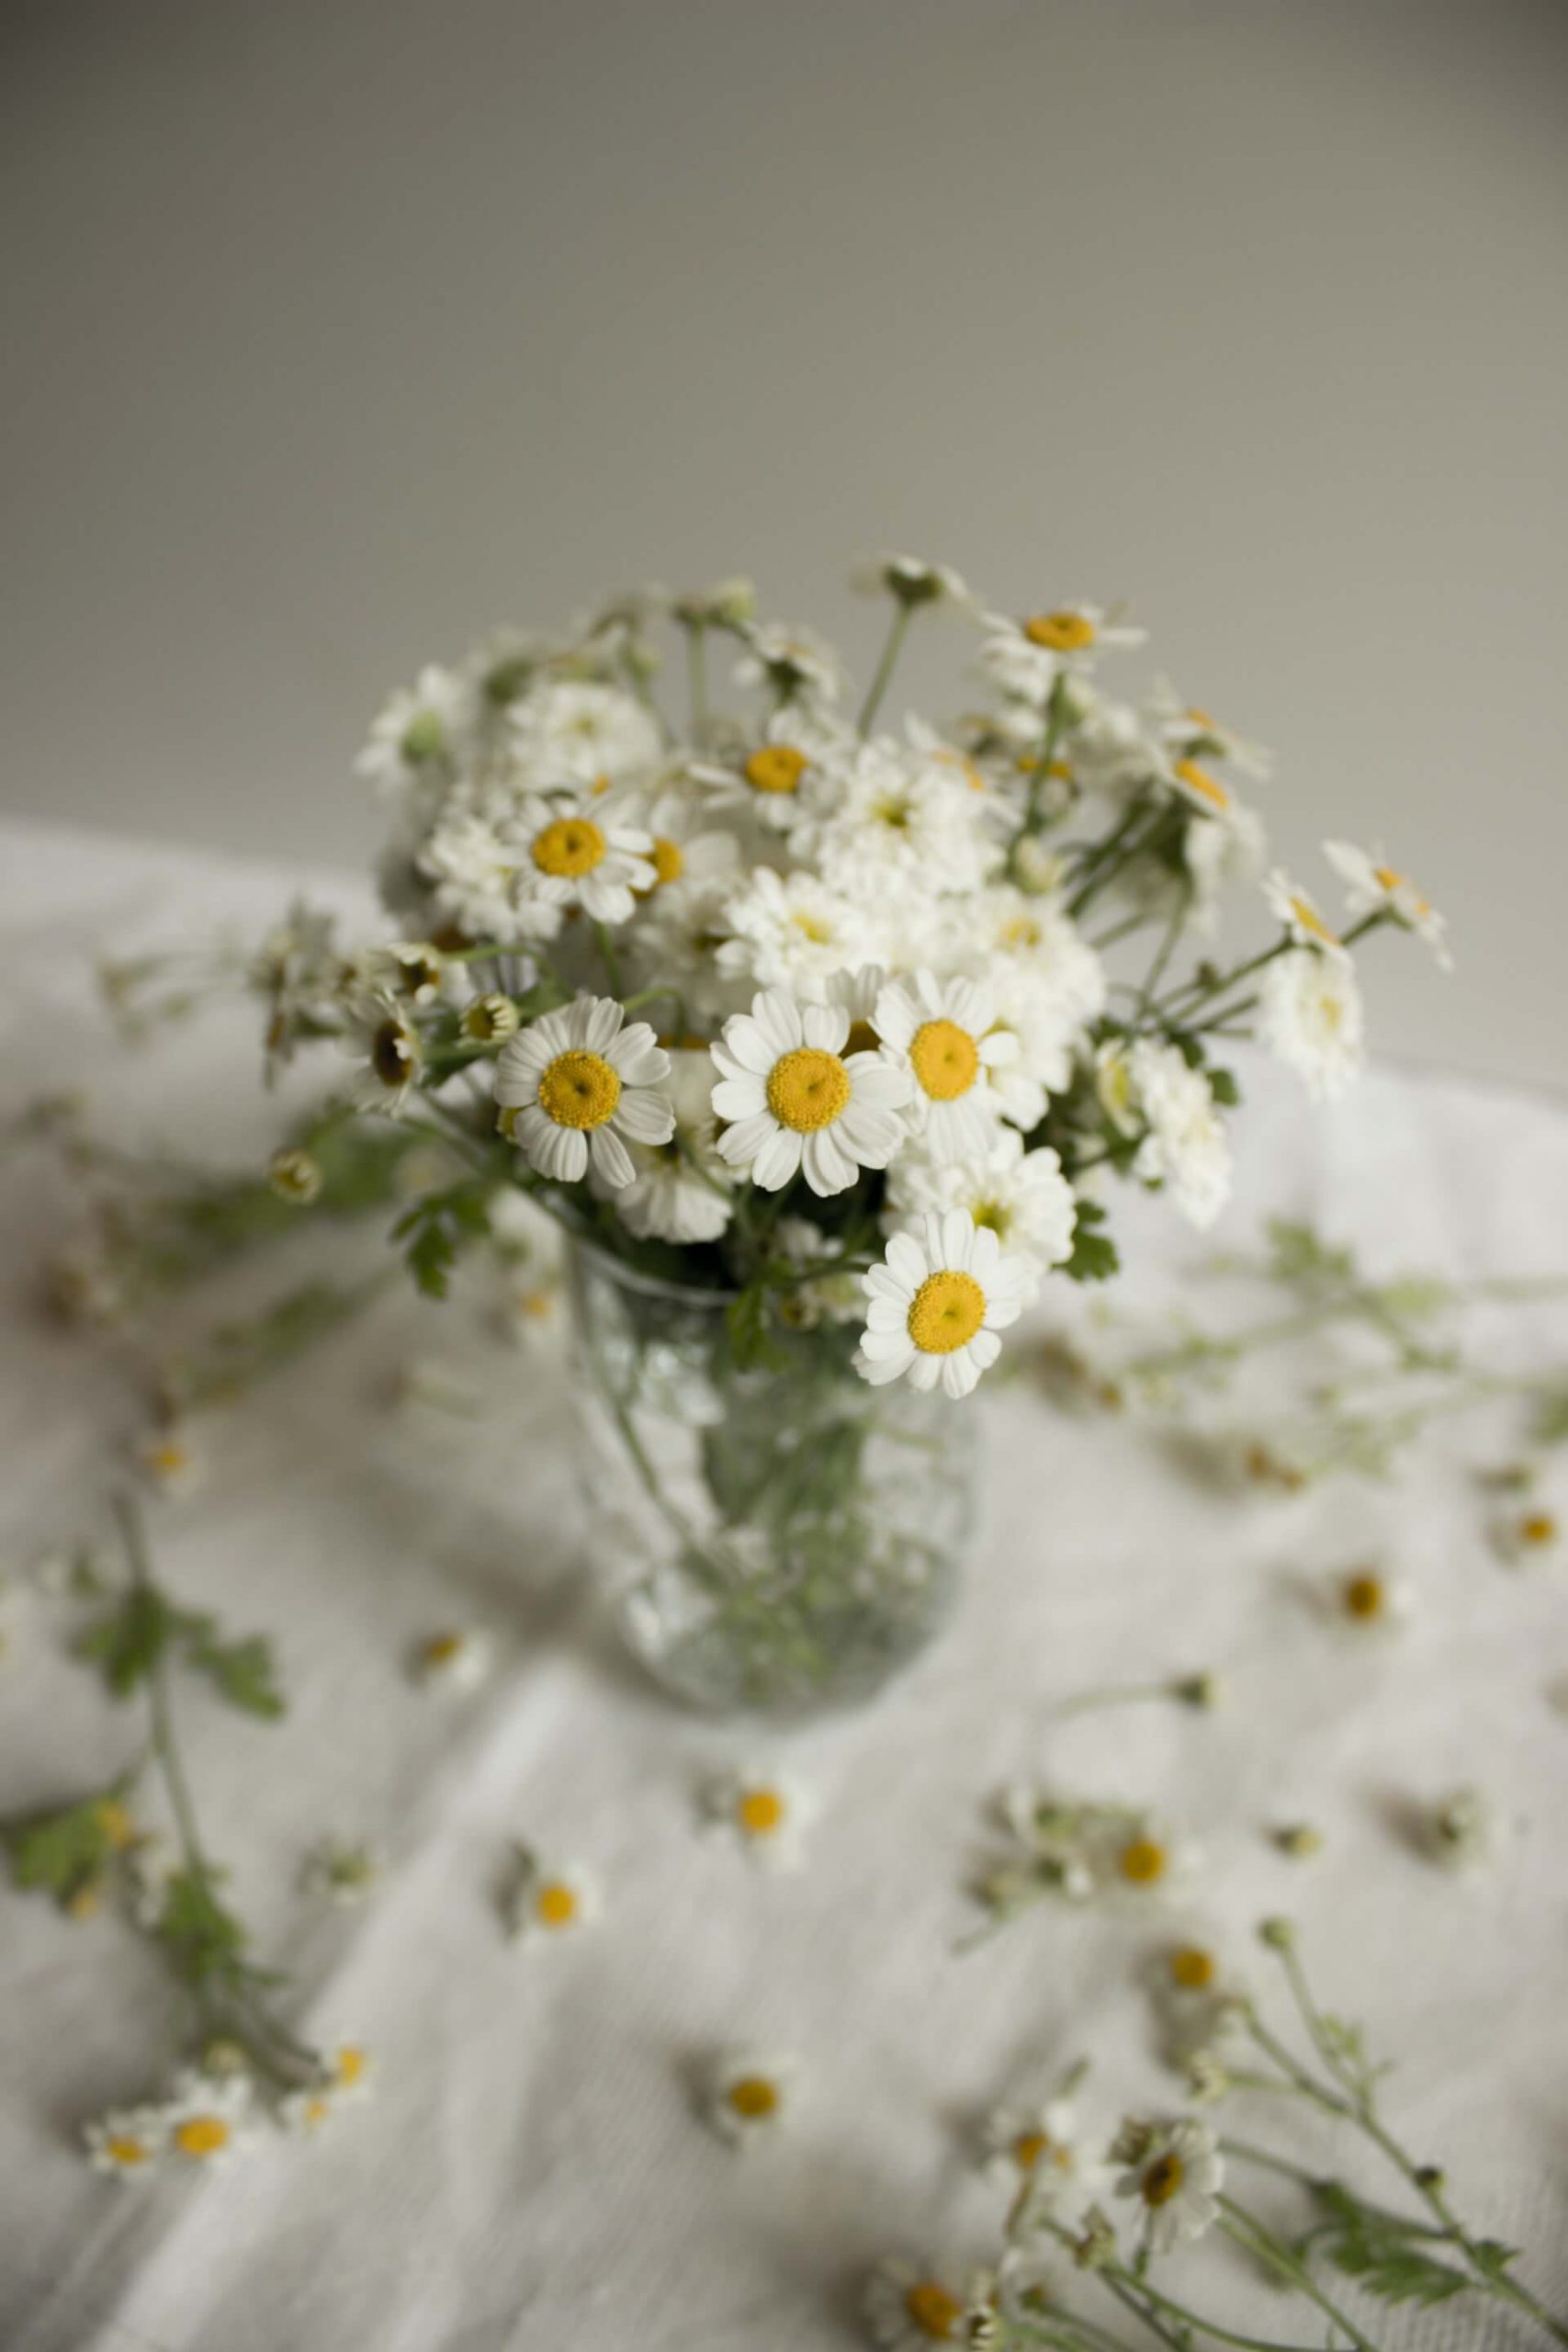 Chamomile oil – discover the way to a radiant complexion!